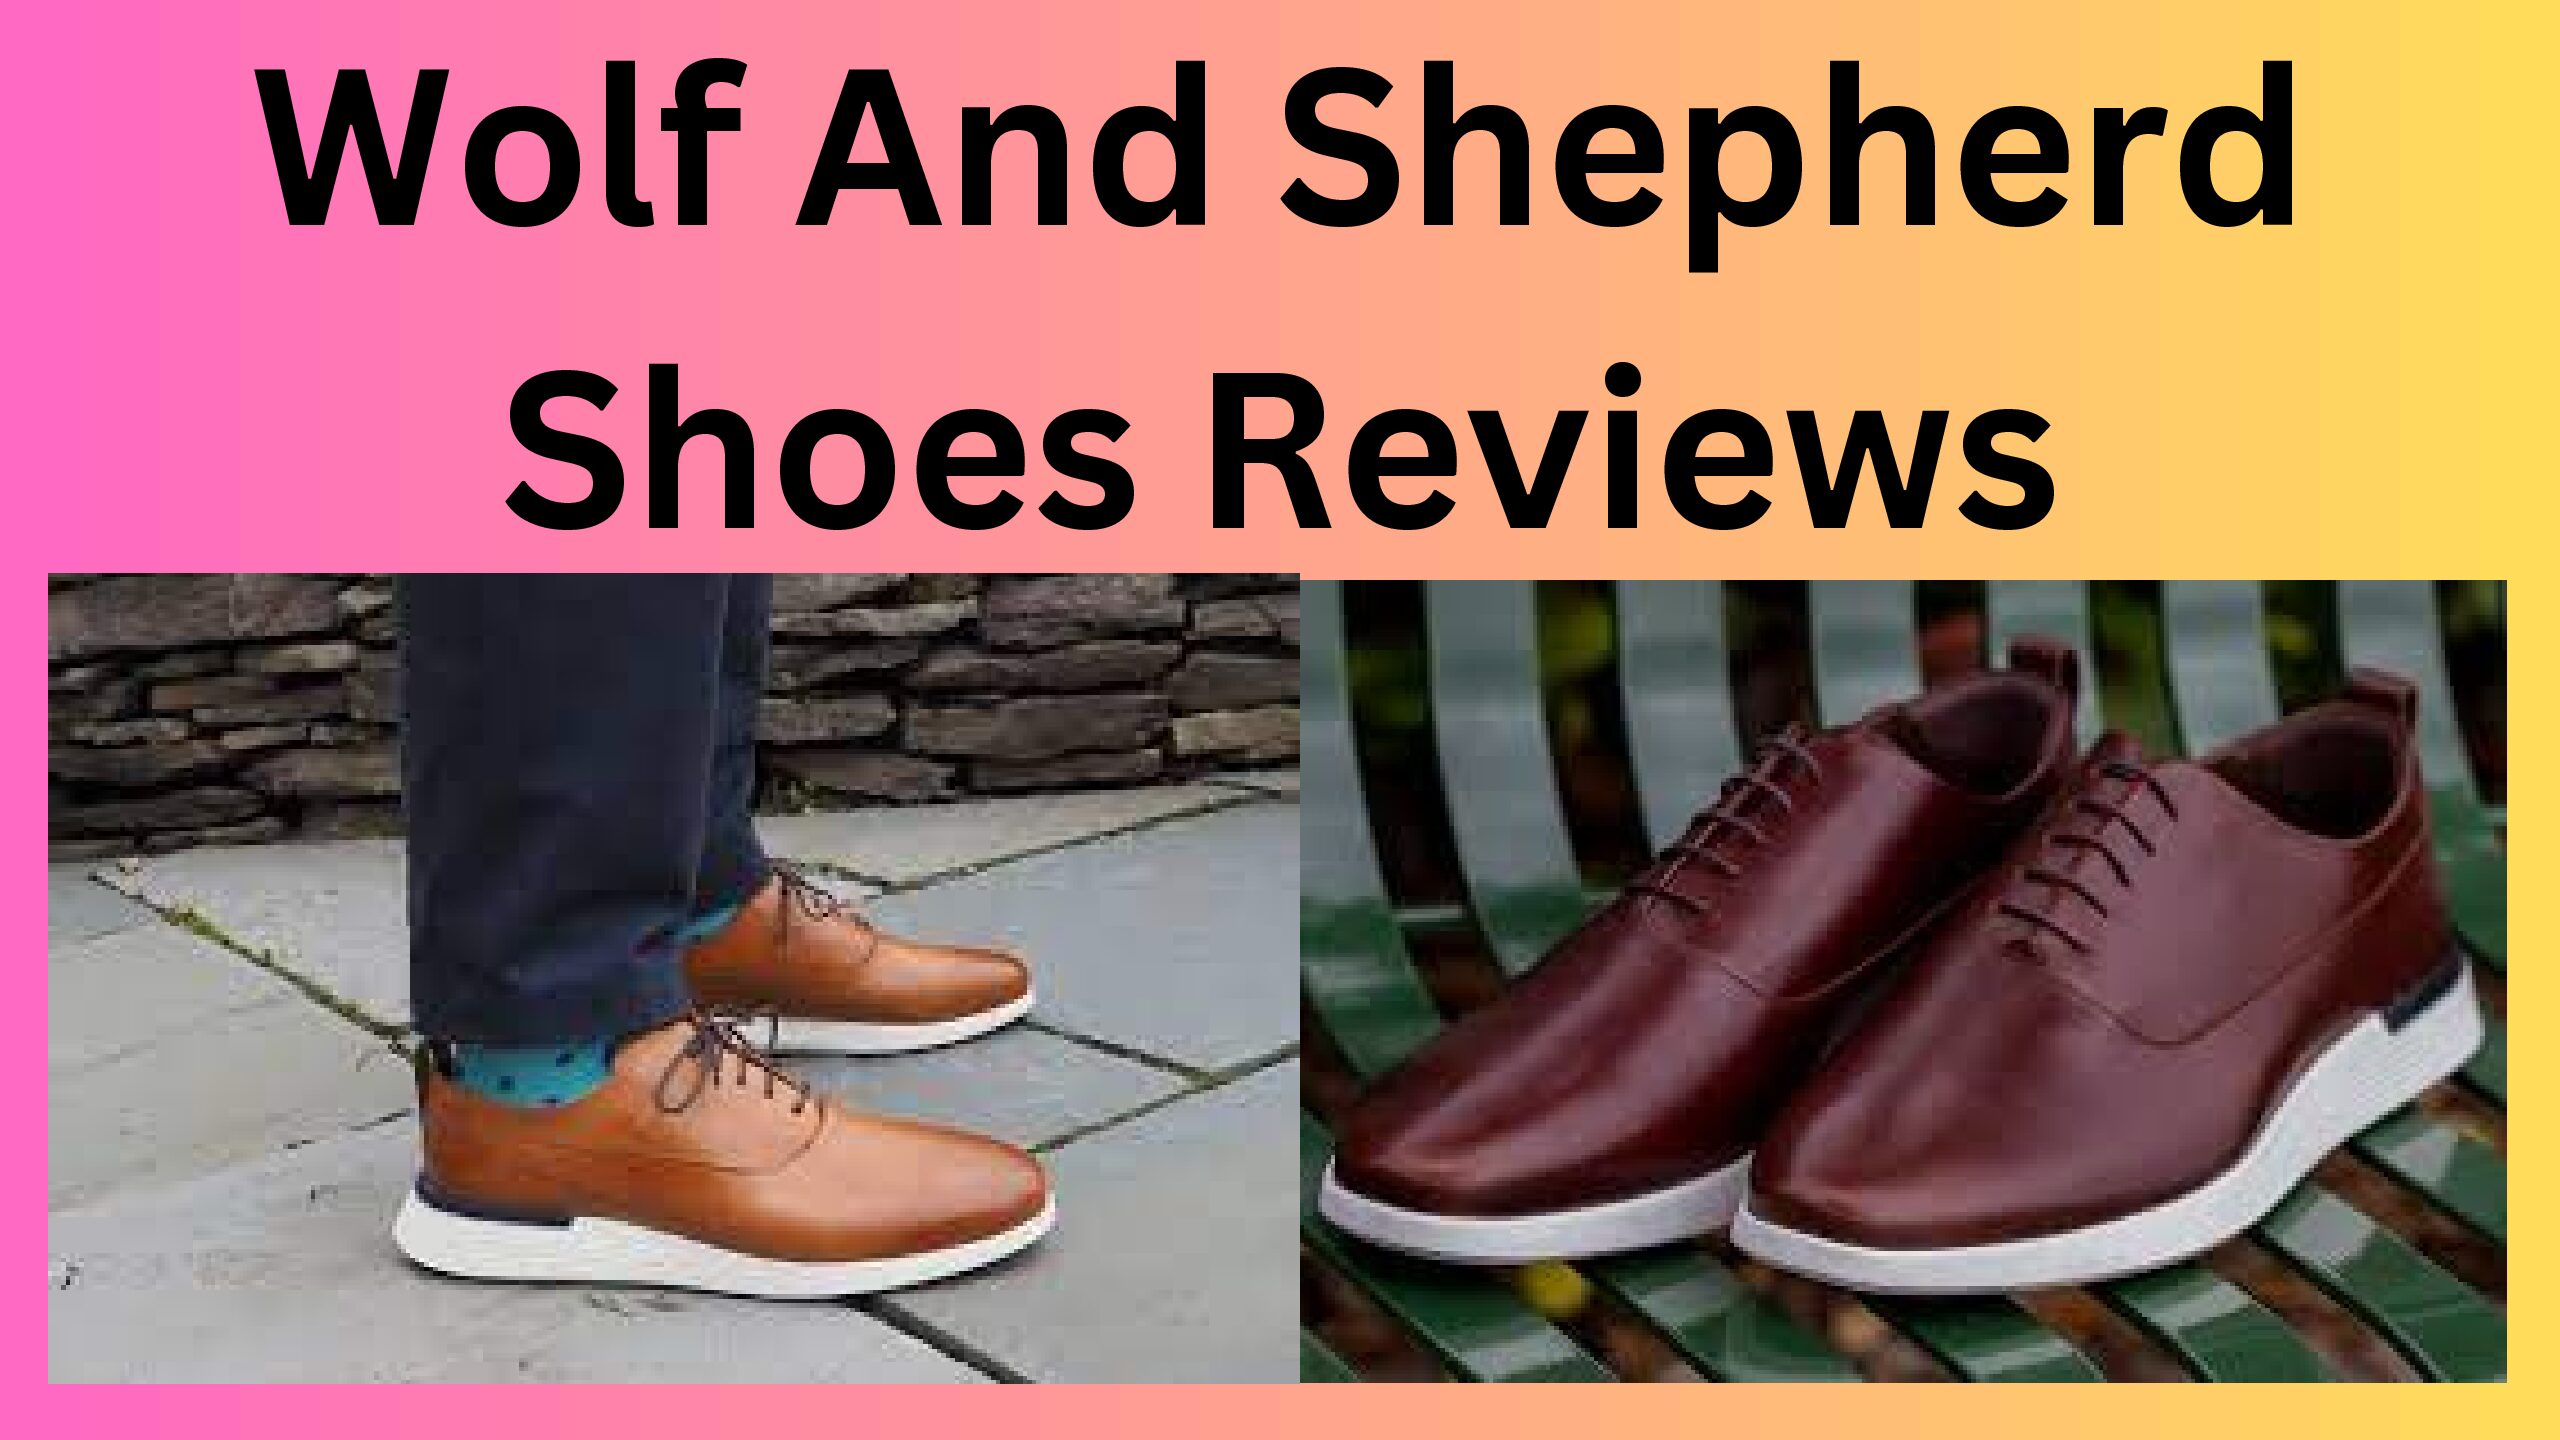 Wolf And Shepherd Shoes Reviews: Is It Legit Or Scam? Read!